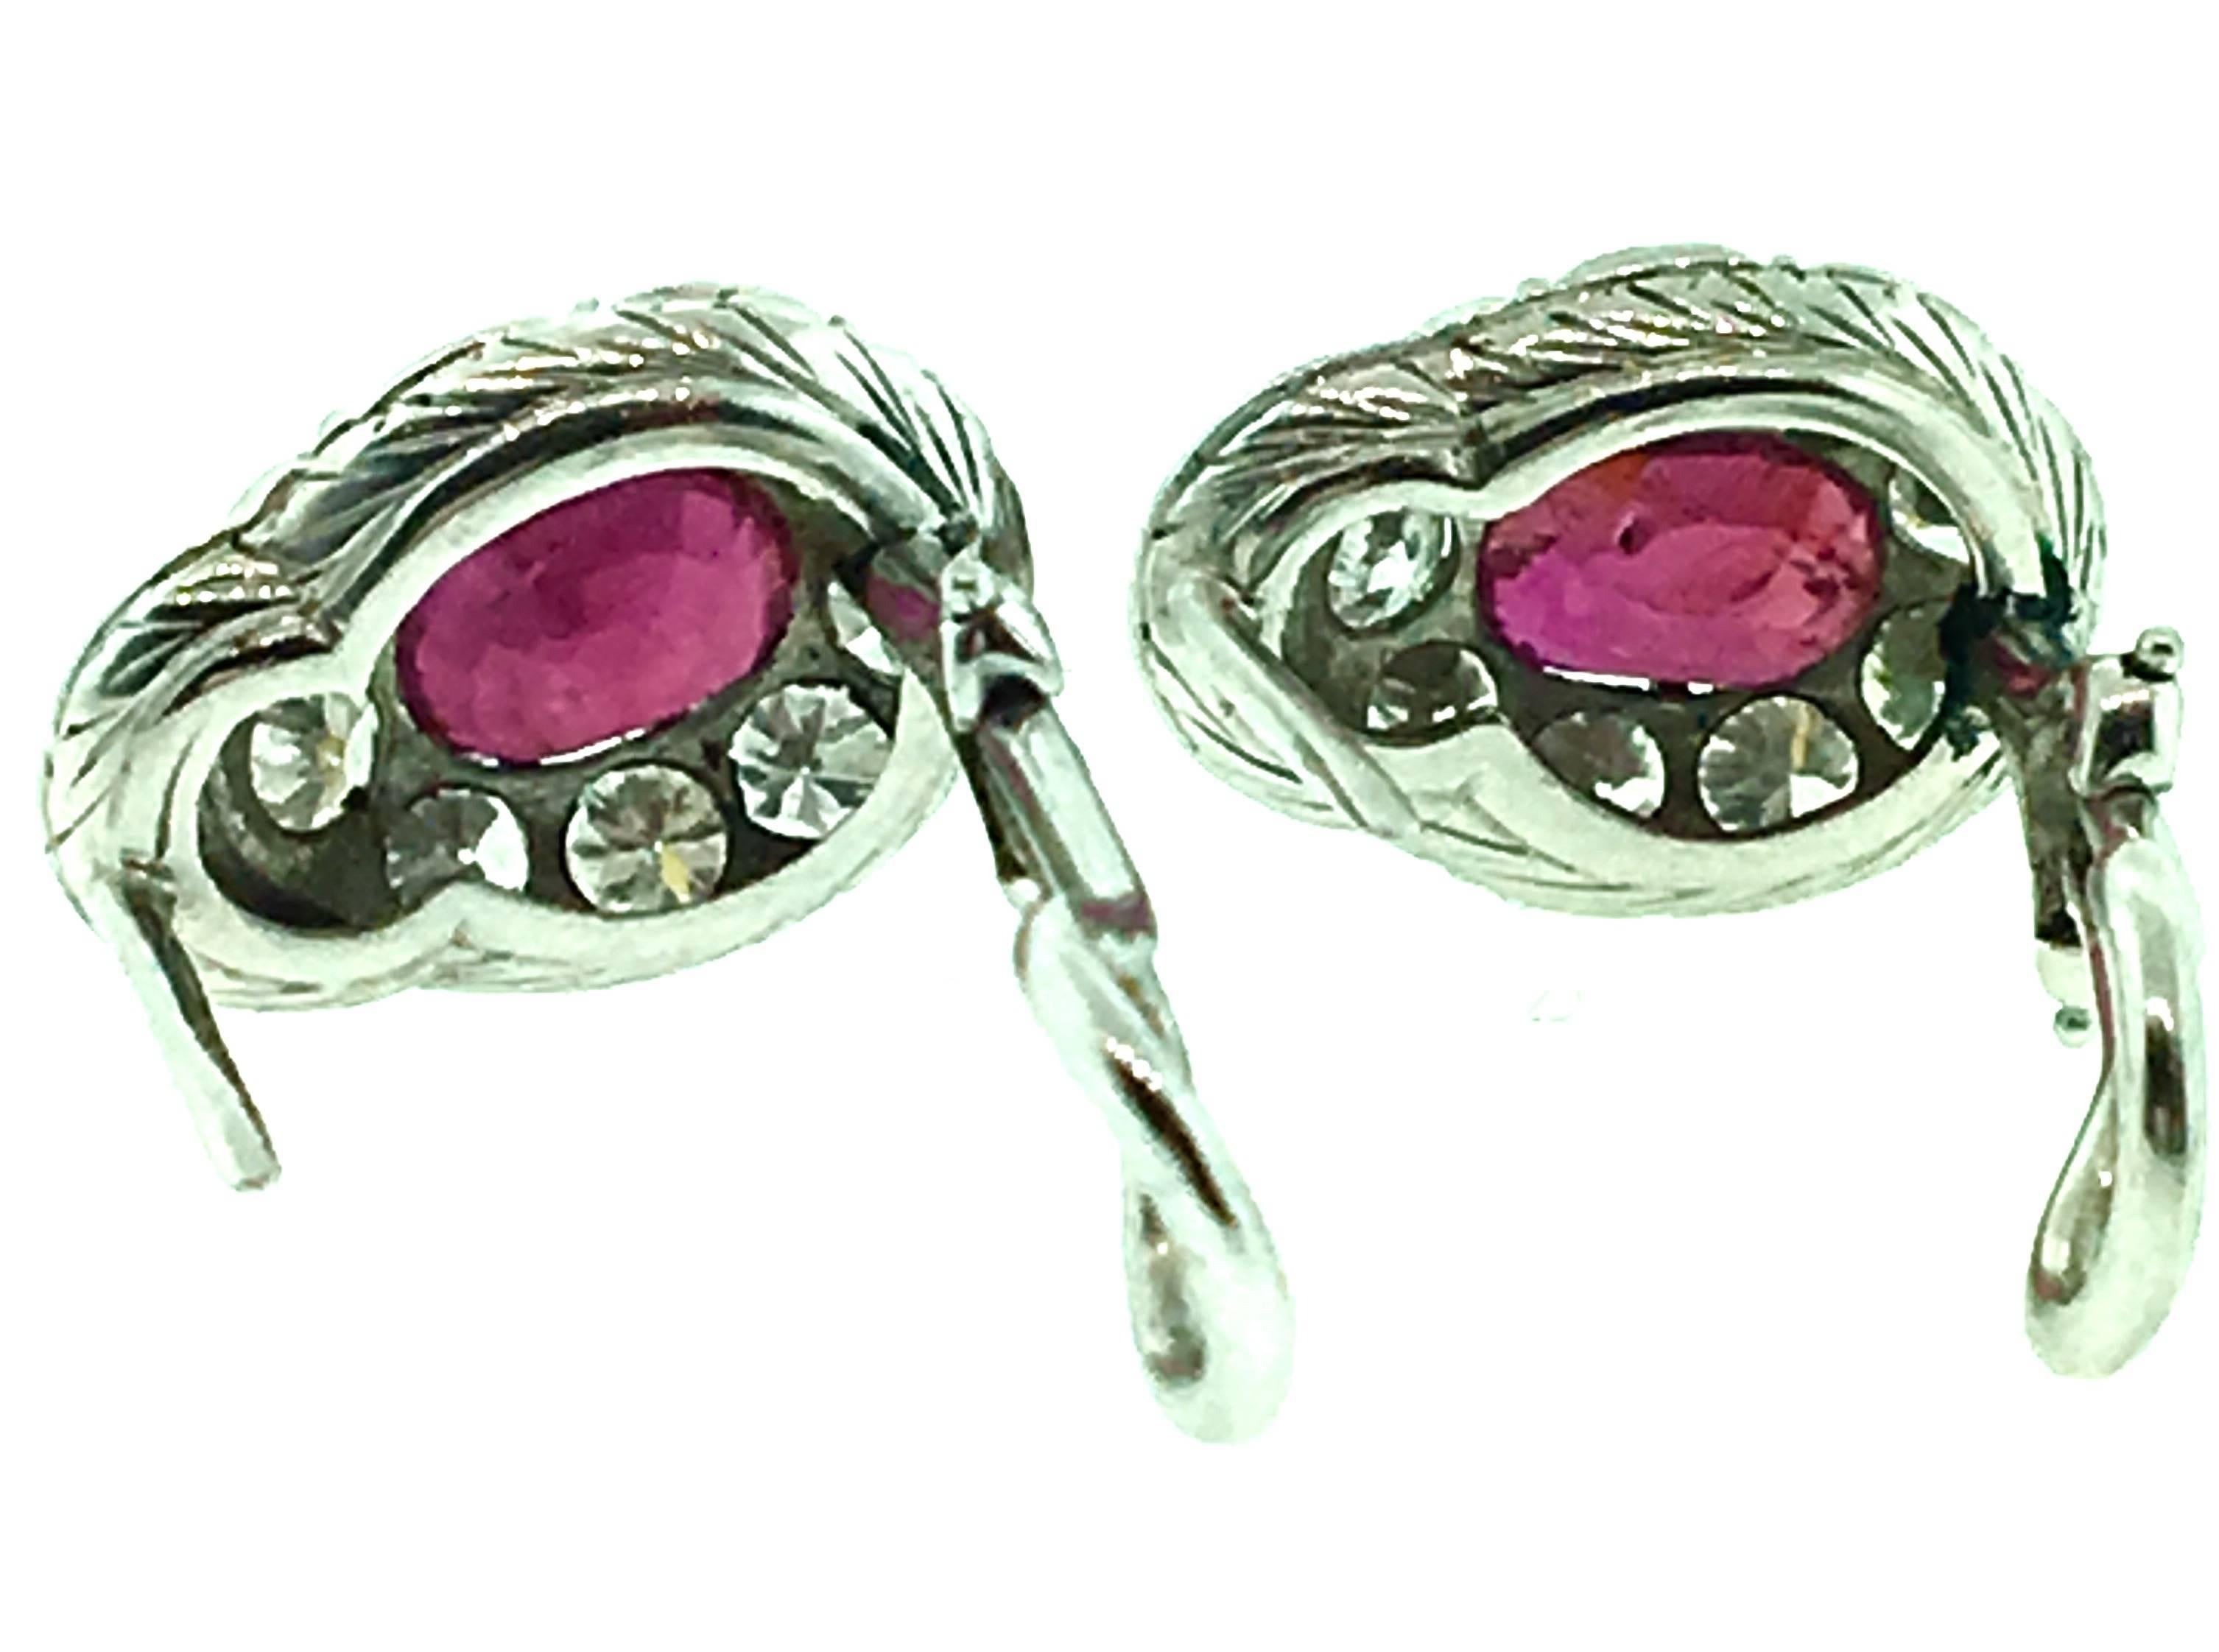 Oval Ruby Earrings surrounded with Round Diamonds set in Platinum.  Nine diamonds circle each Ruby and are topped with 5 single cut Diamonds. Earrings contain estimated 1.00 ct in Red Oval Rubies and 1.60 ct estimated in Round Diamonds. Diamond